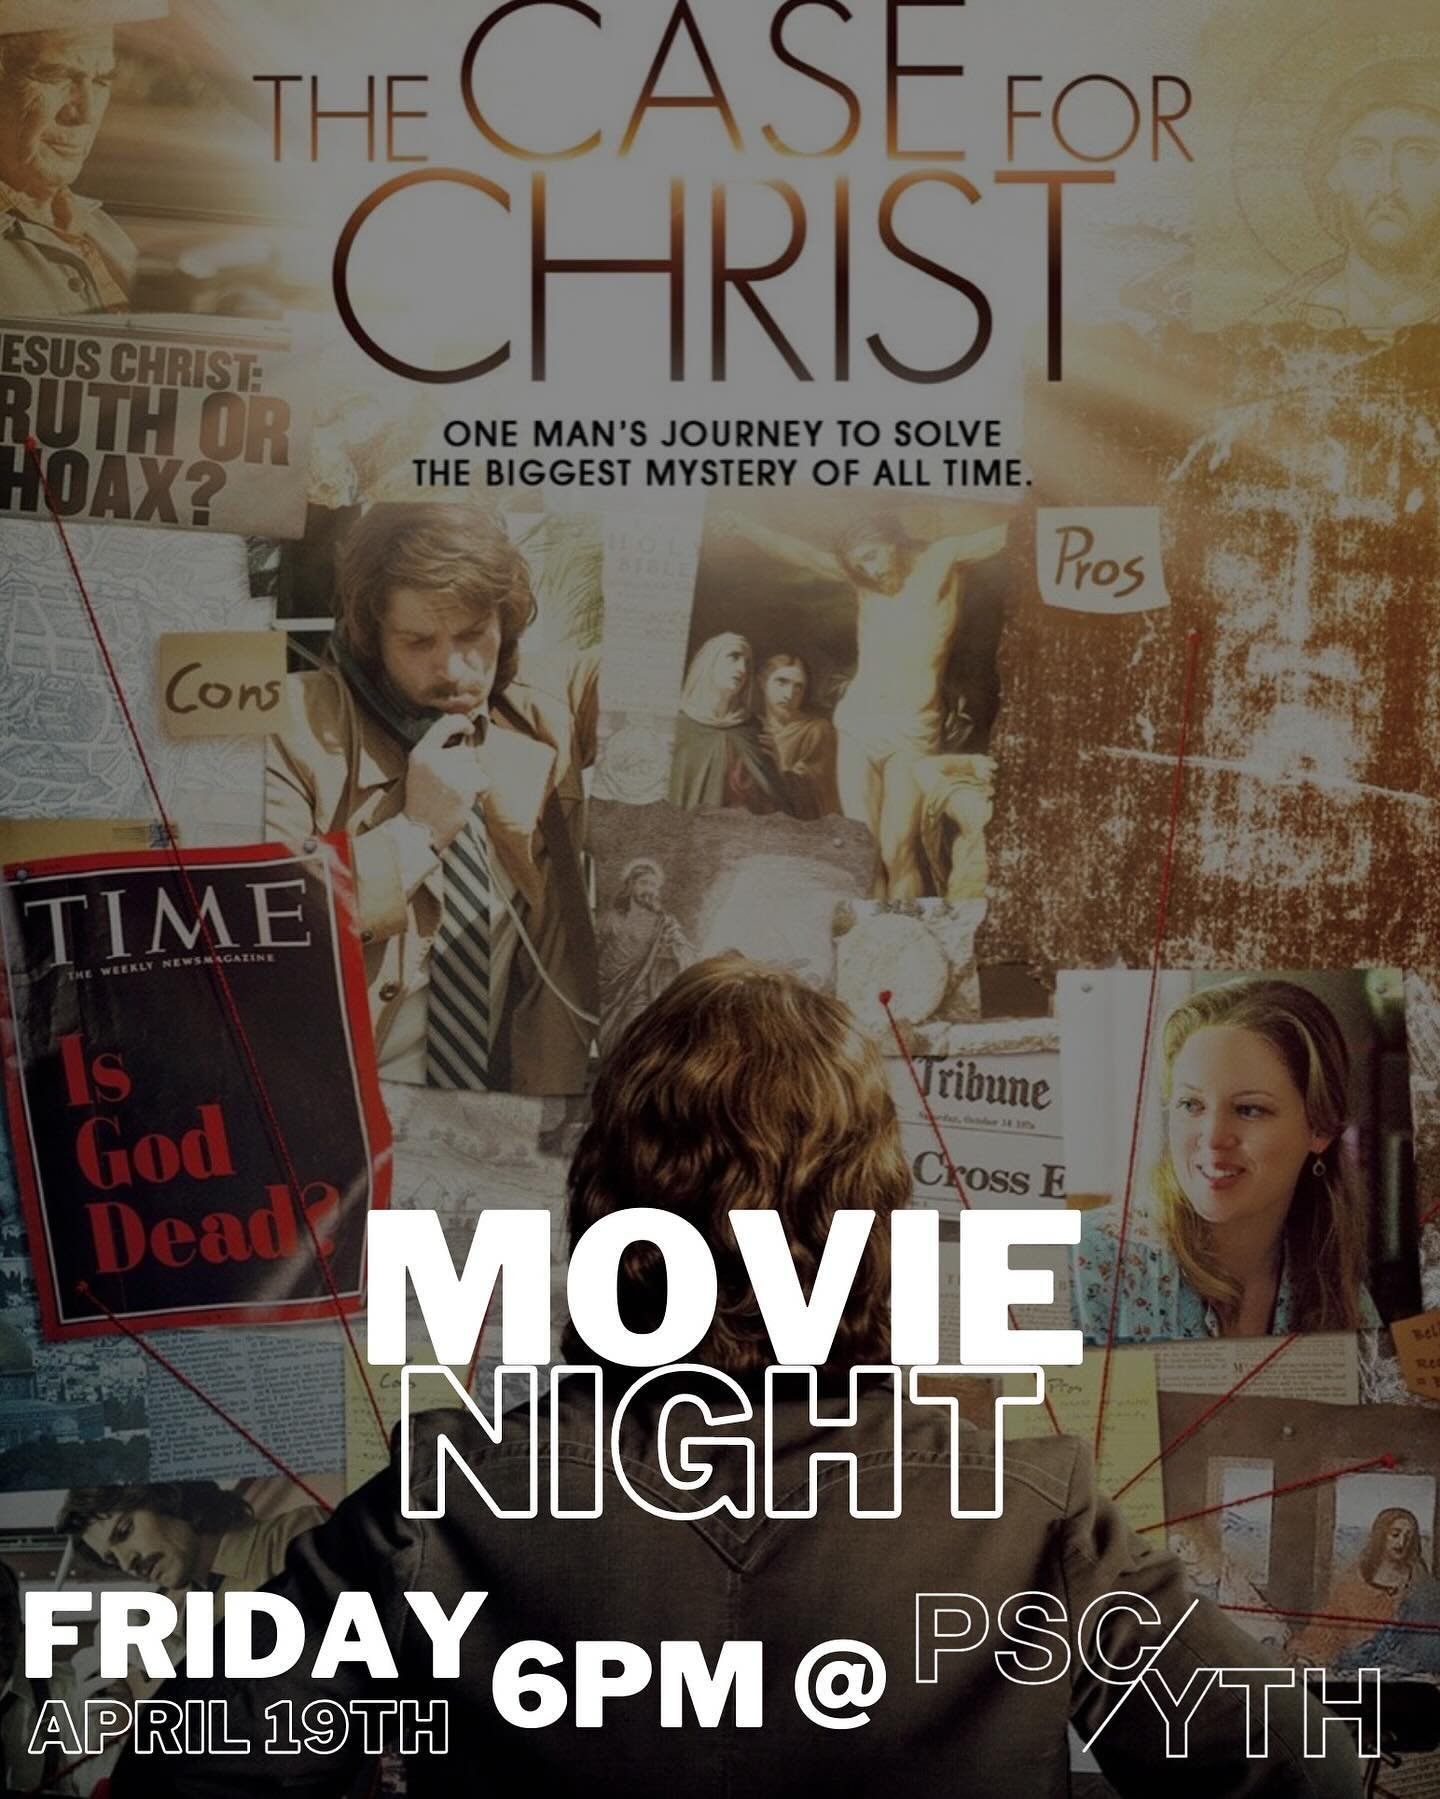 Reminder that PSC YTH will NOT have a small group happening tonight, but students come by tomorrow, April 19th at 6pm to watch The Case for Christ at Palmetto Shores Church. Popcorn and refreshments will be provided 🍿See you at movie night, PSC YTH!